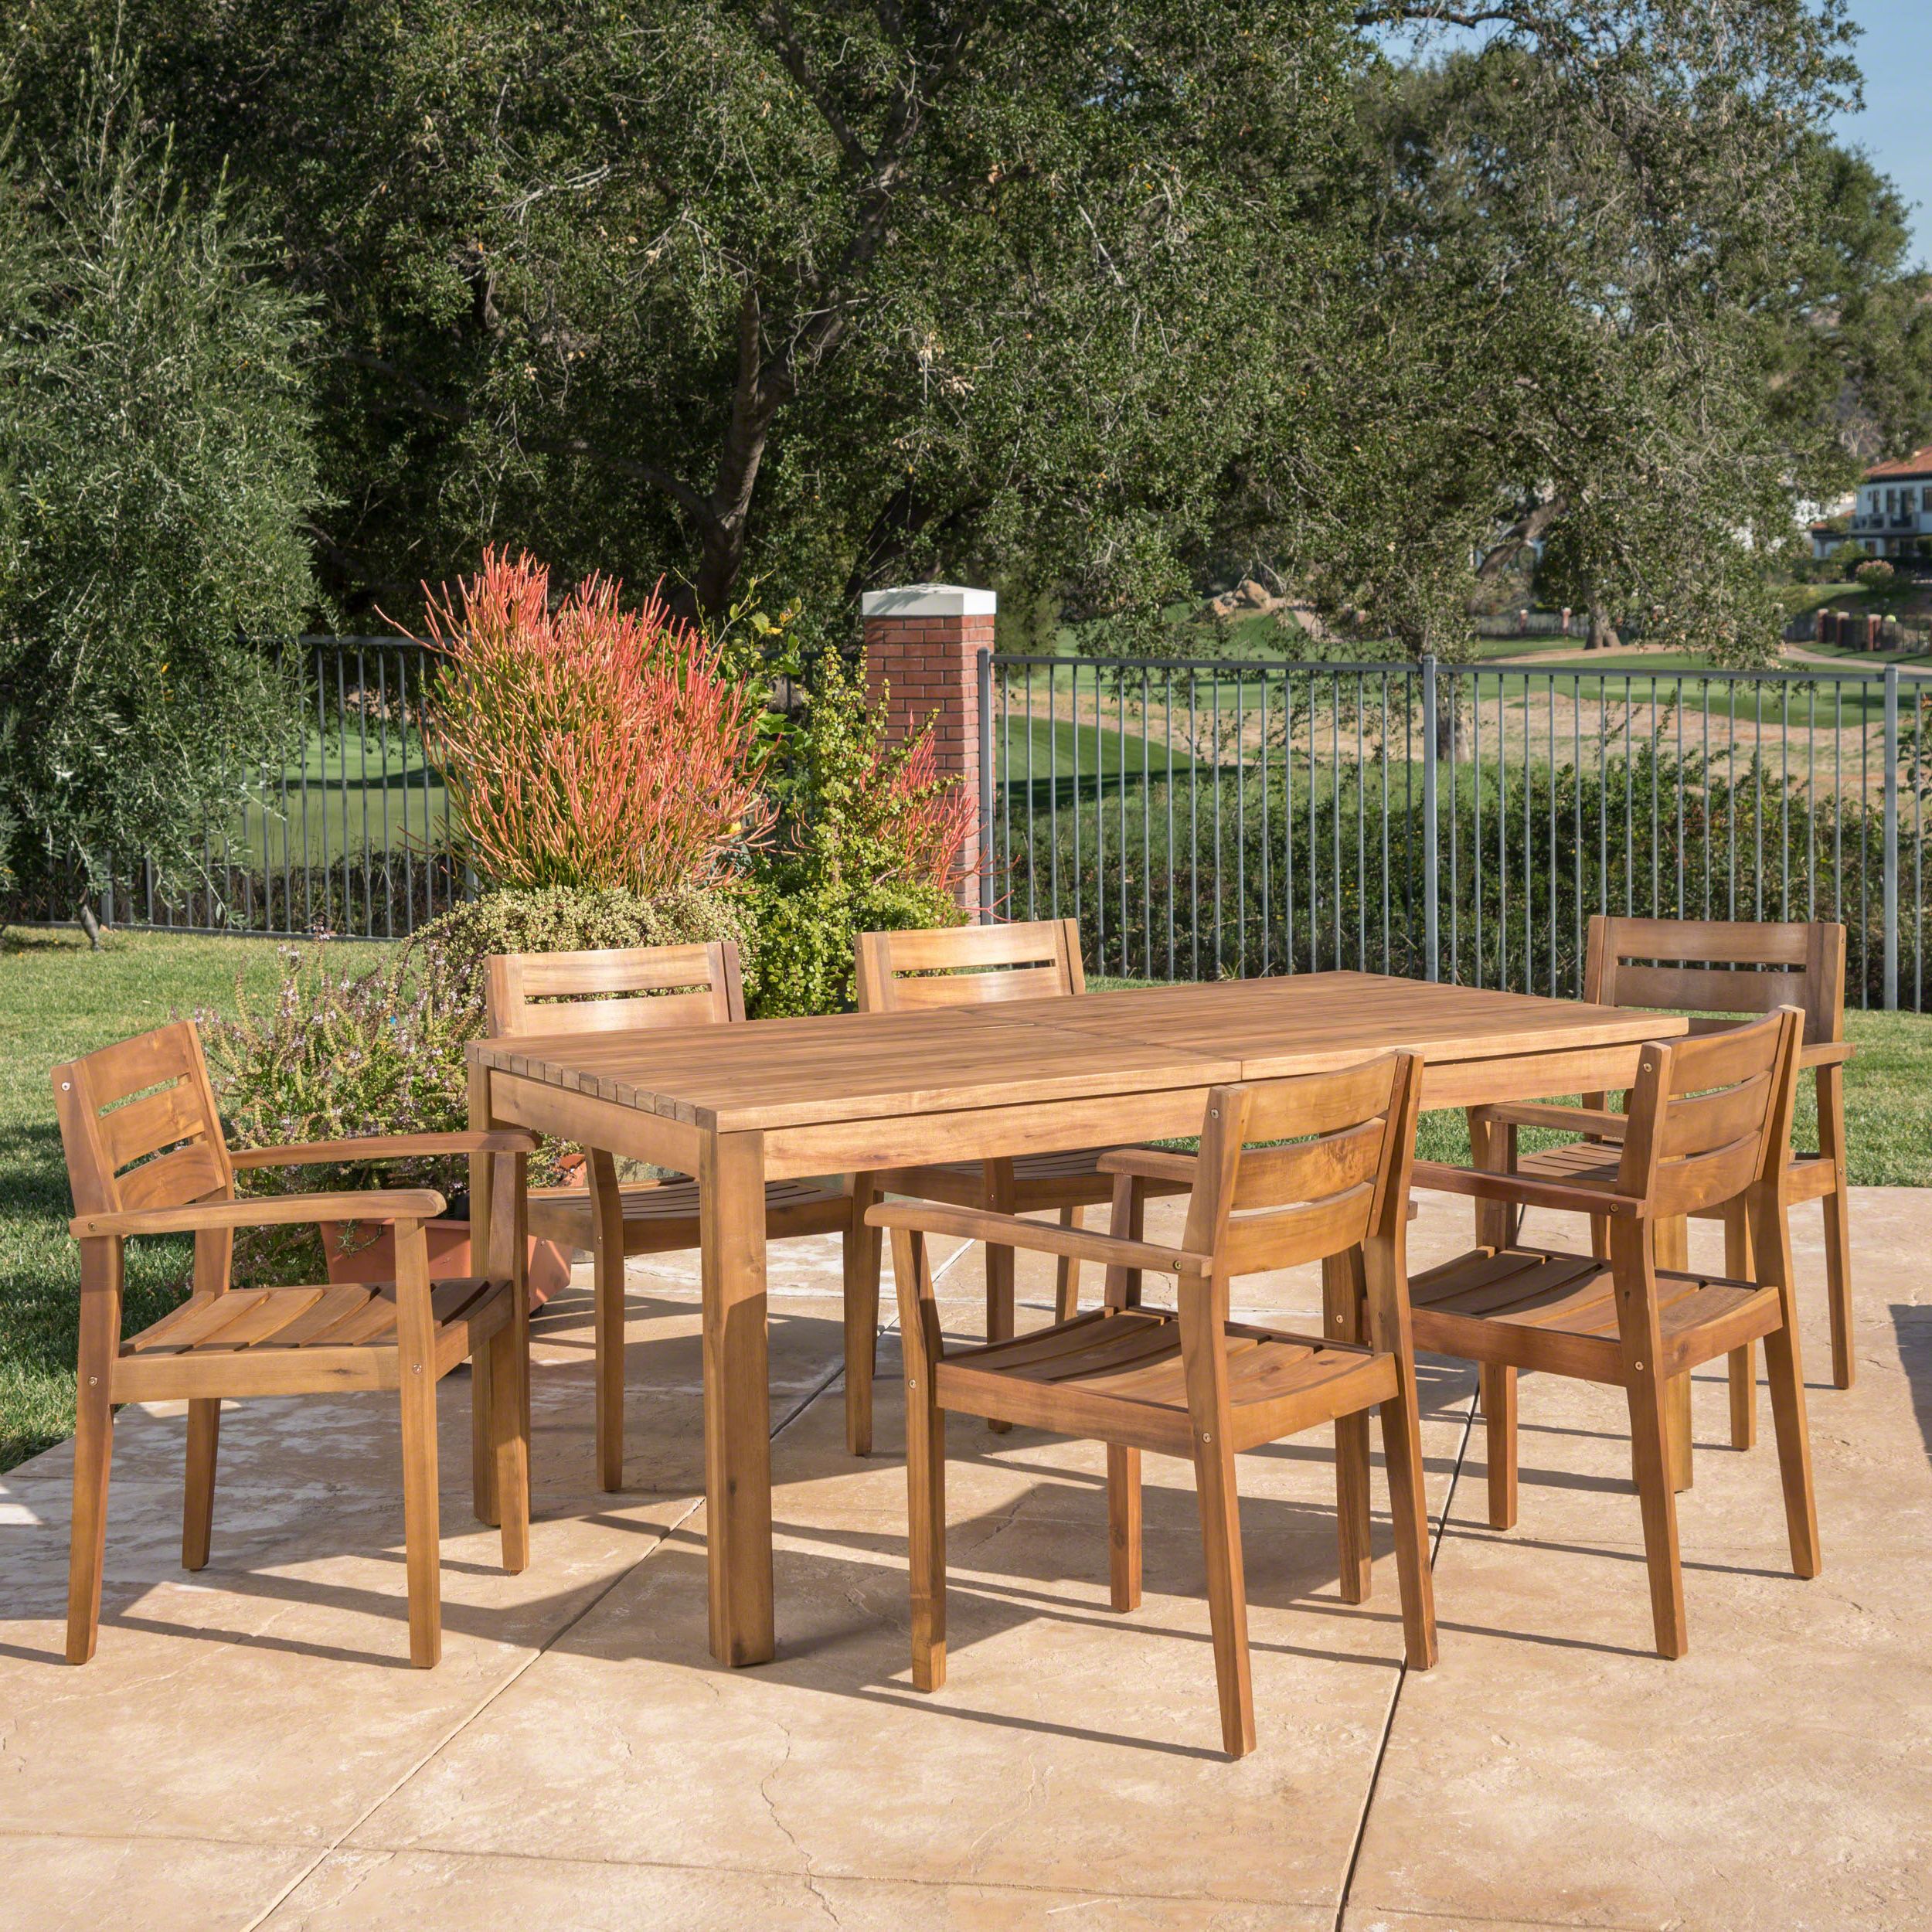 Trendy Acacia Wood Outdoor Seating Patio Sets Intended For Caroline Outdoor 7 Piece Acacia Wood Dining Set With Expandable Dining (View 1 of 15)